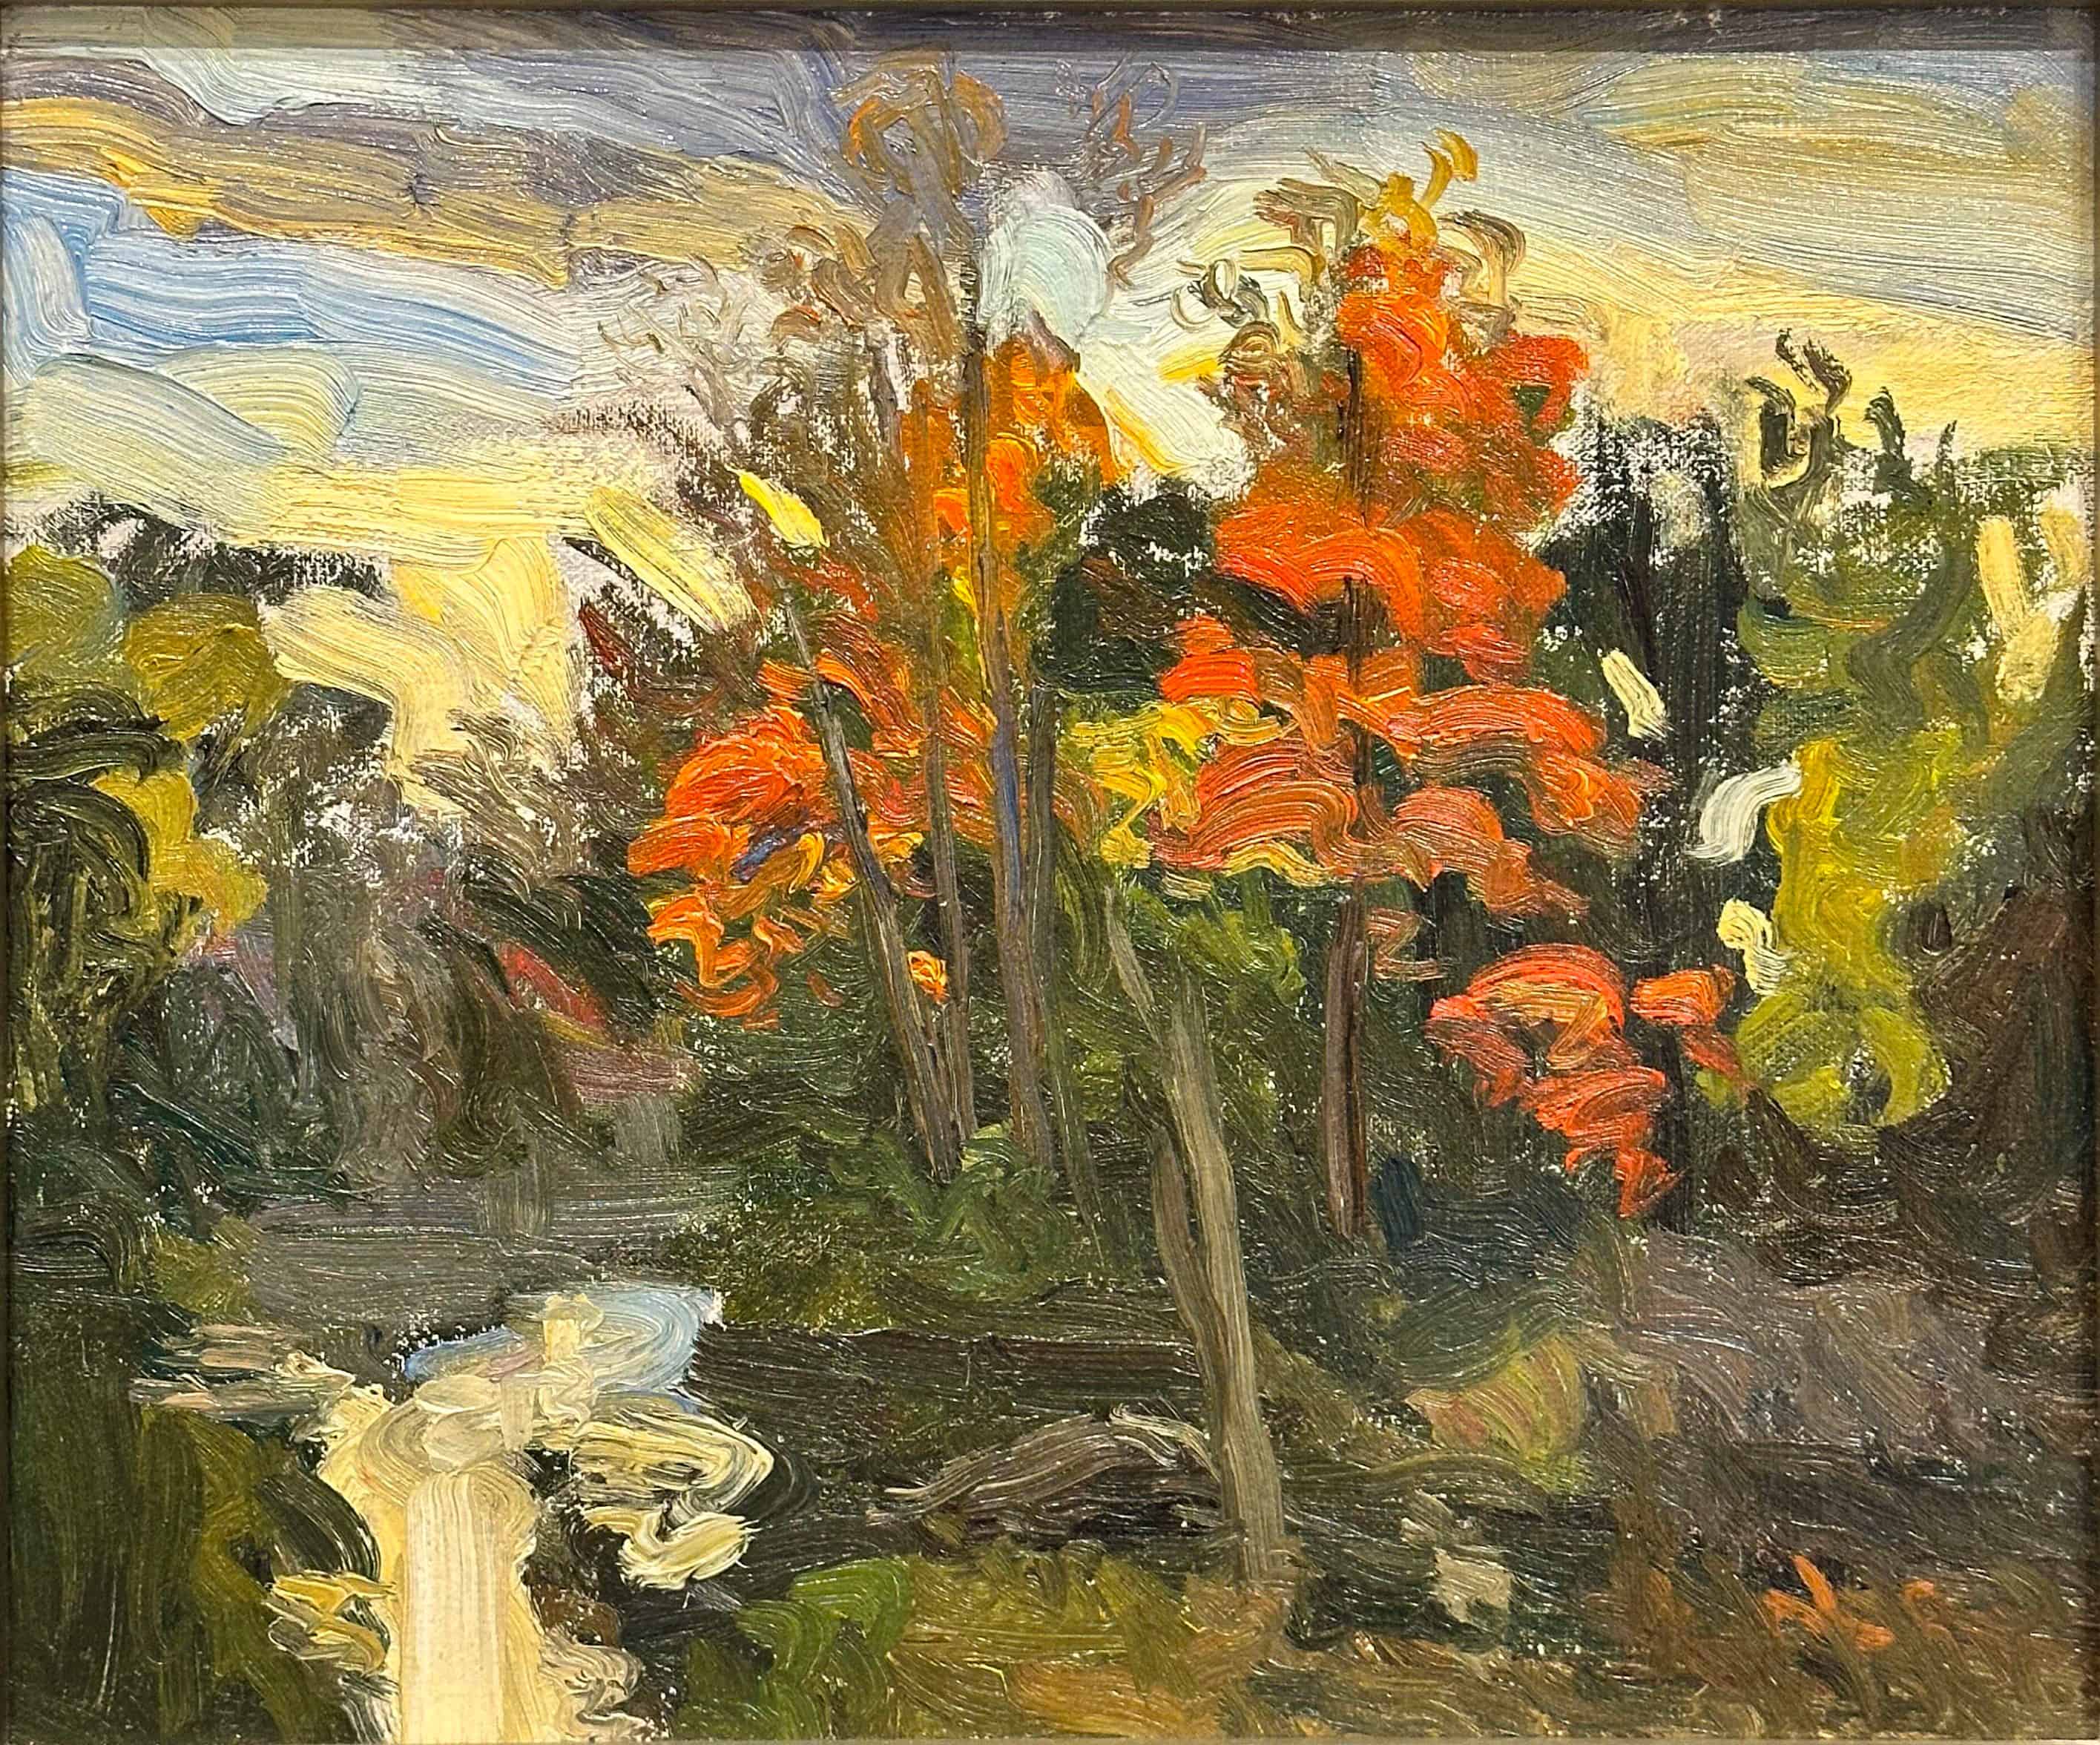 Contemporary Art. Title: Red Ontario, Oil on Canvas, 10 x 12 in by Contemporary Canadian Artist Paul Chizik.